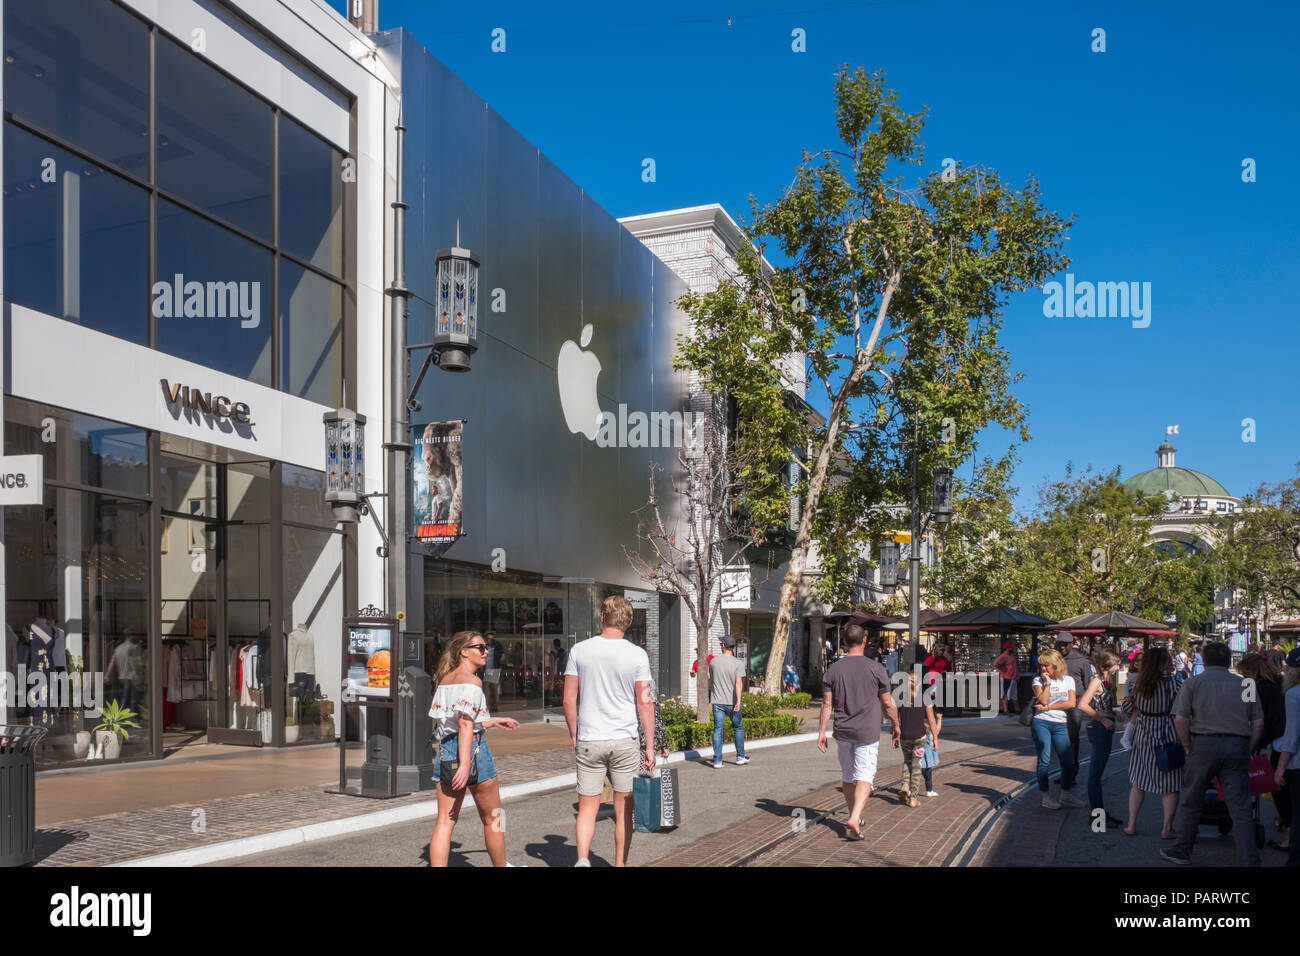 Shops and stores at the upmarket shopping mall, The Grove at the Farmers Market, Los Angeles, LA, California, USA Stock Photo